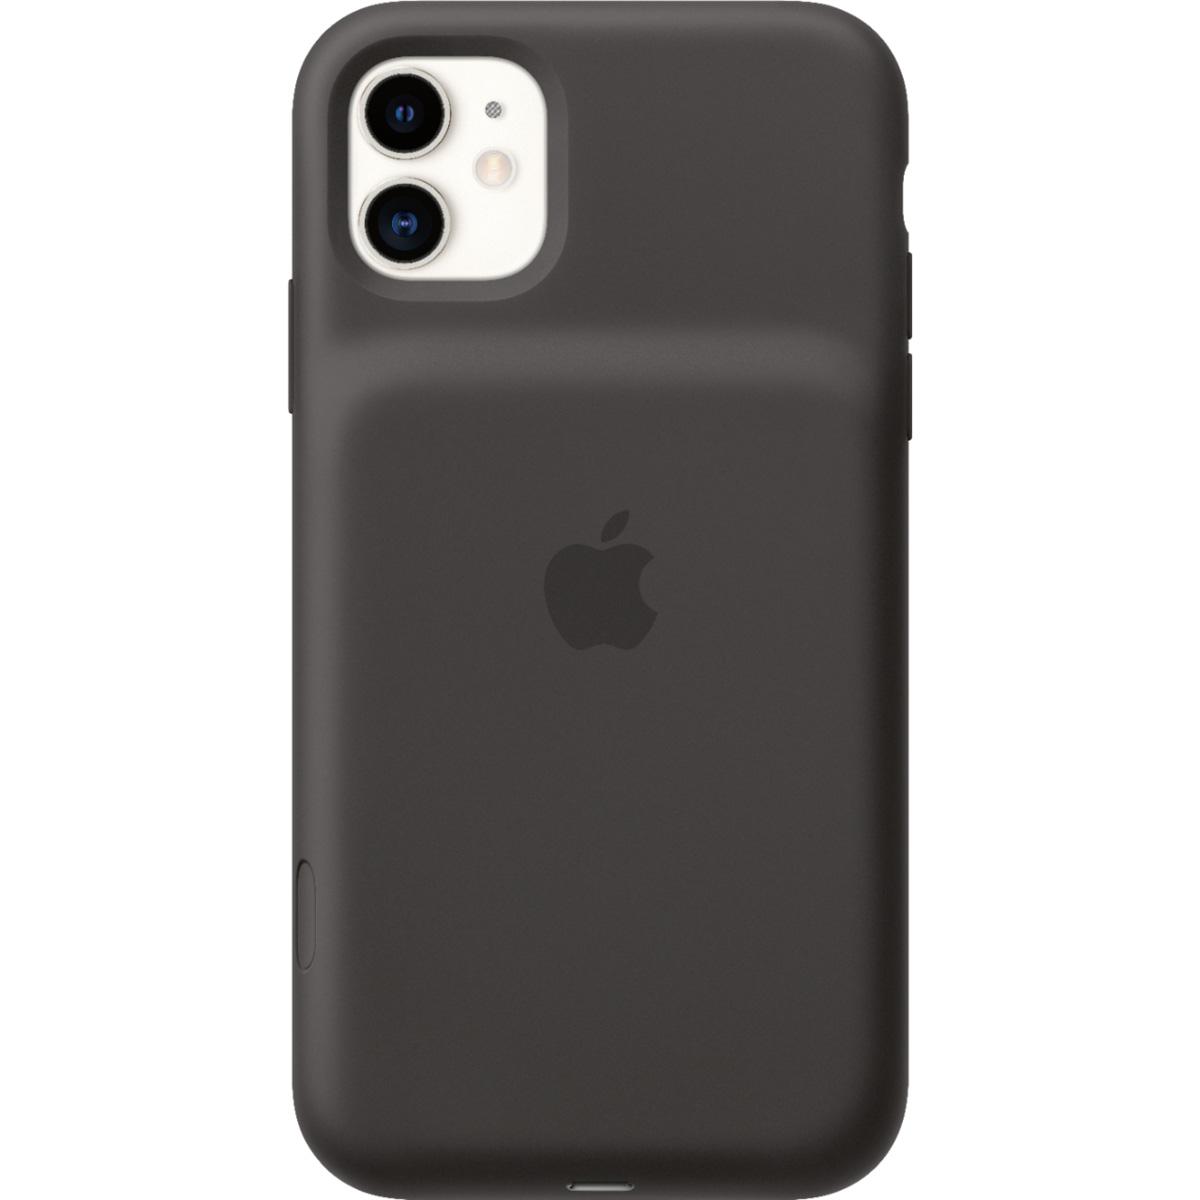 Apple iPhone 11 or 11 Pro Smart Battery Case for $51.99 Shipped